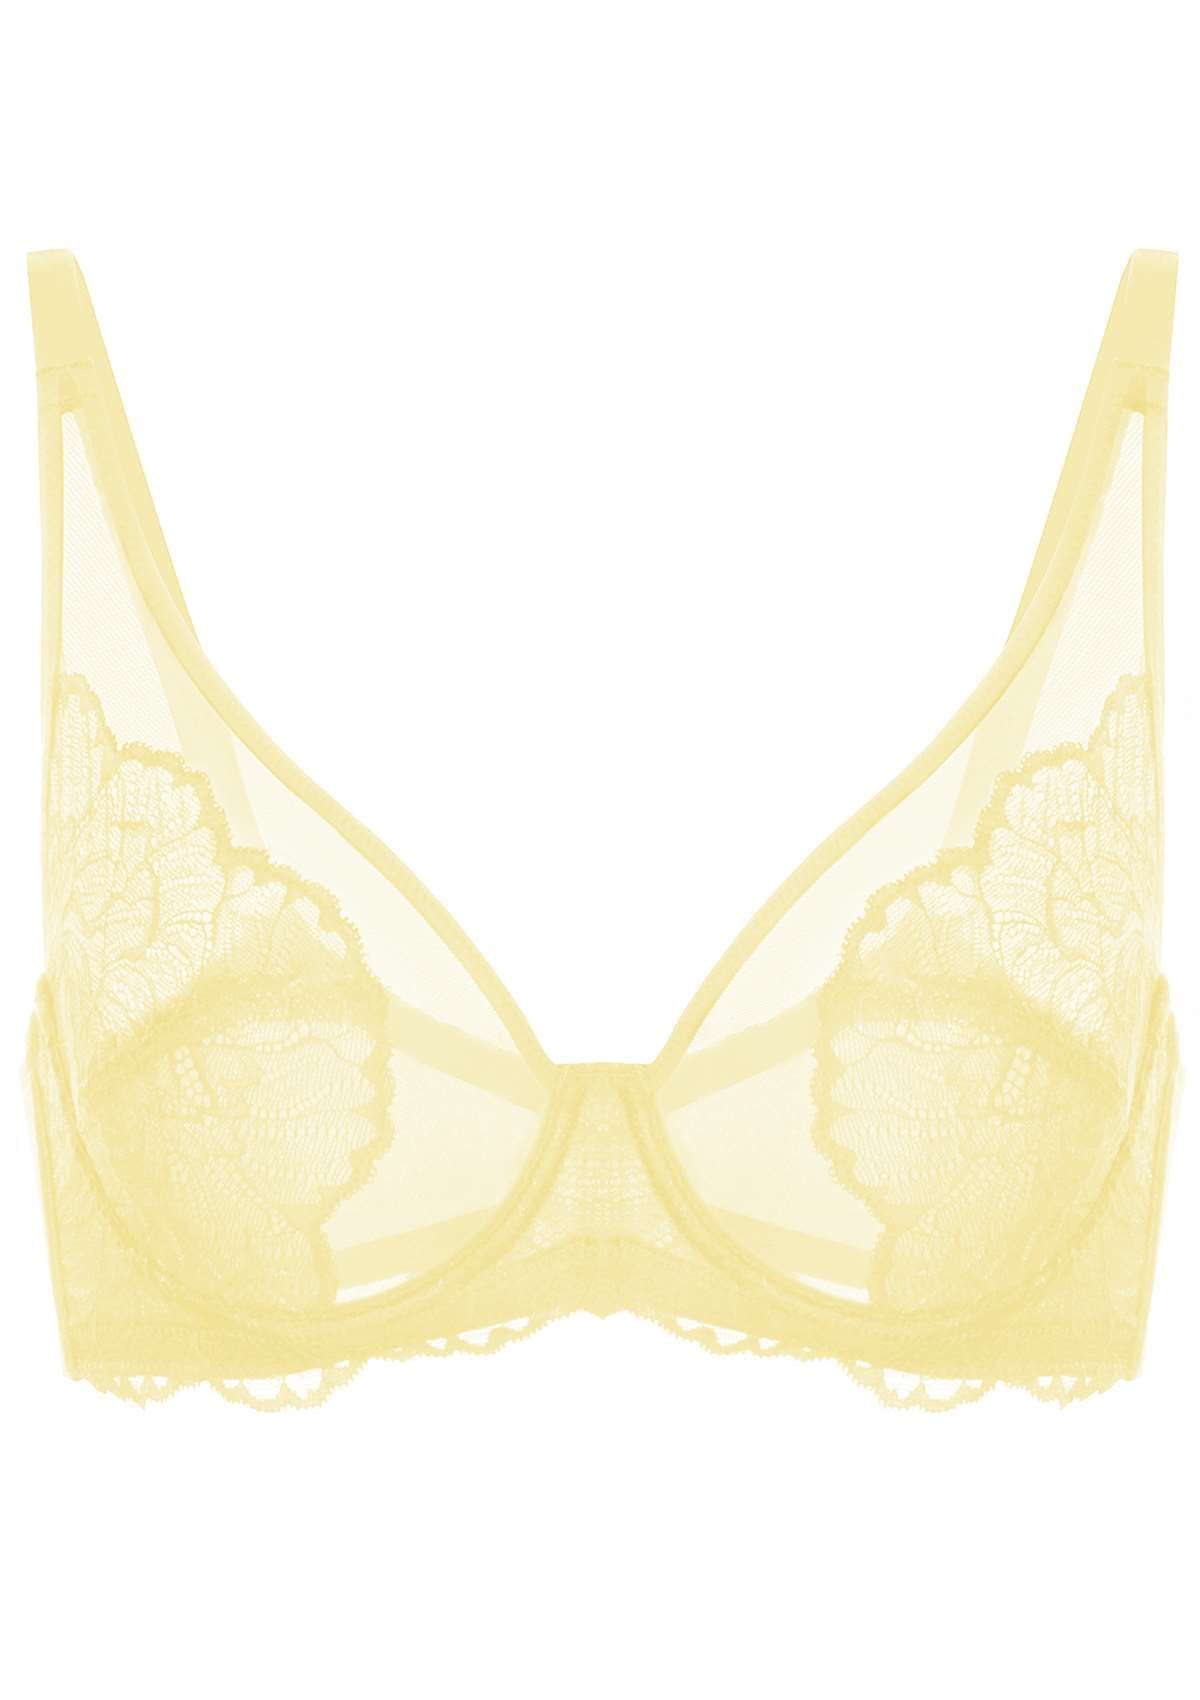 HSIA Blossom Full Coverage Side Support Bra: Designed For Heavy Busts - Beige / 38 / G